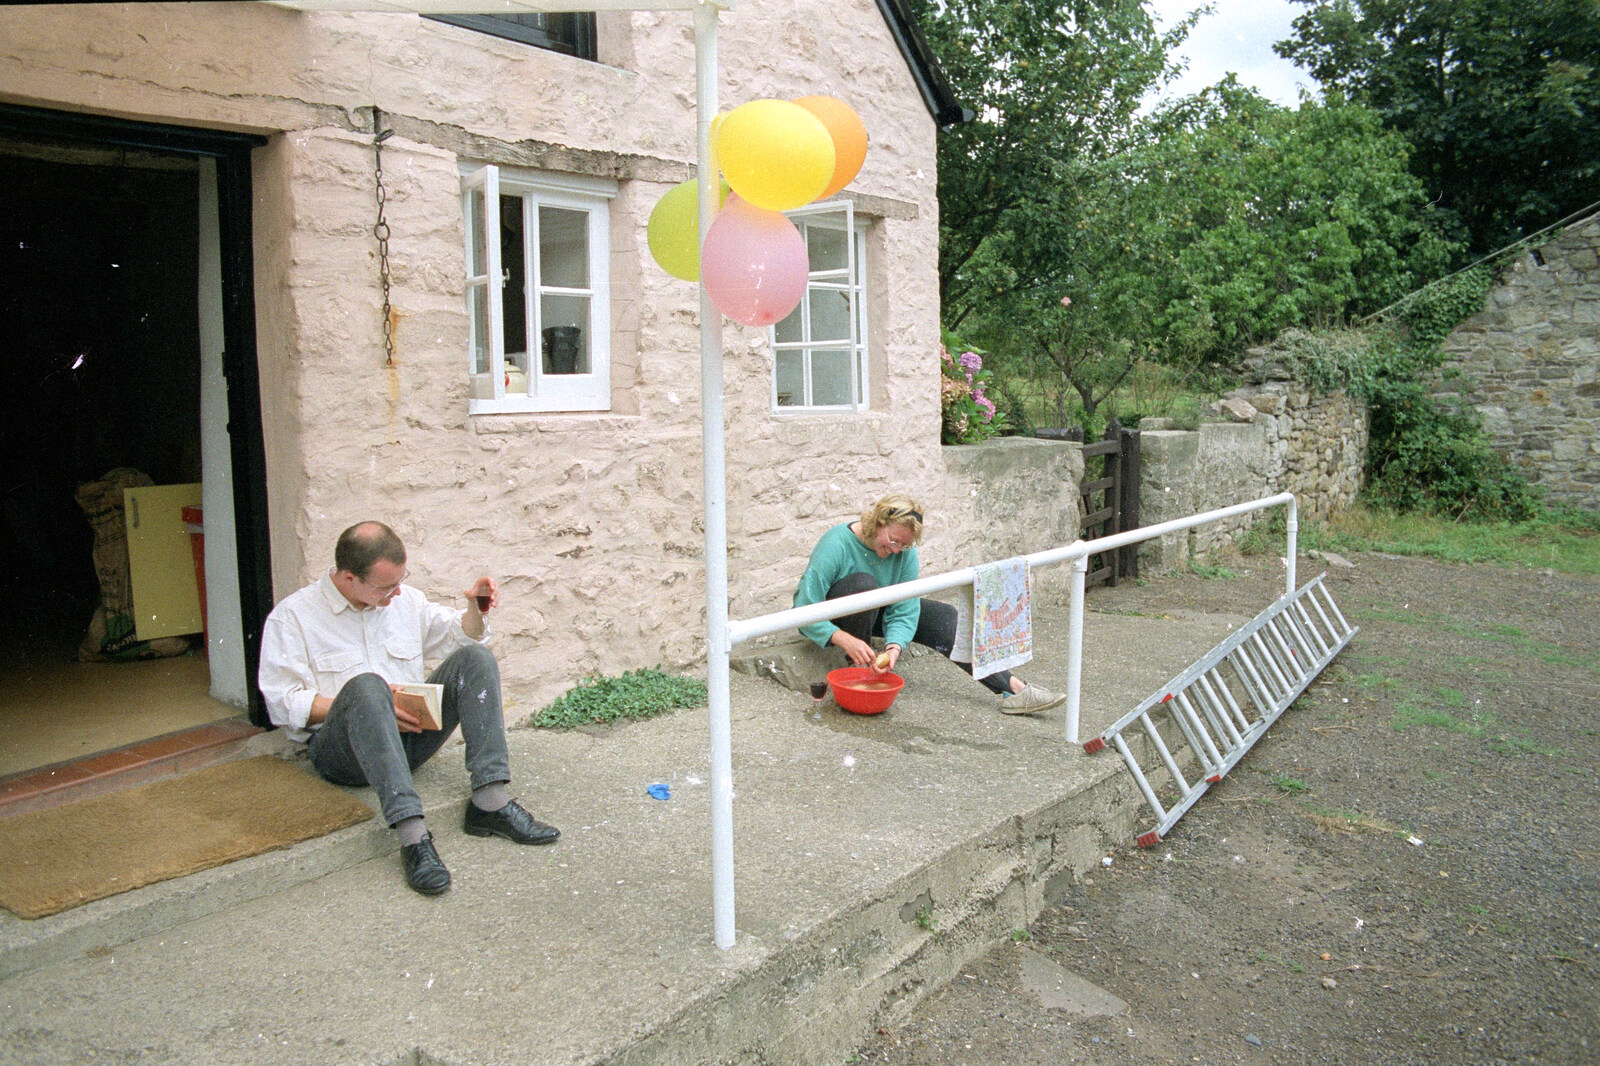 Liz's Party, Abergavenny, Monmouthshire, Wales - 4th August 1990: Hamish reads whilst Liz peels potatoes